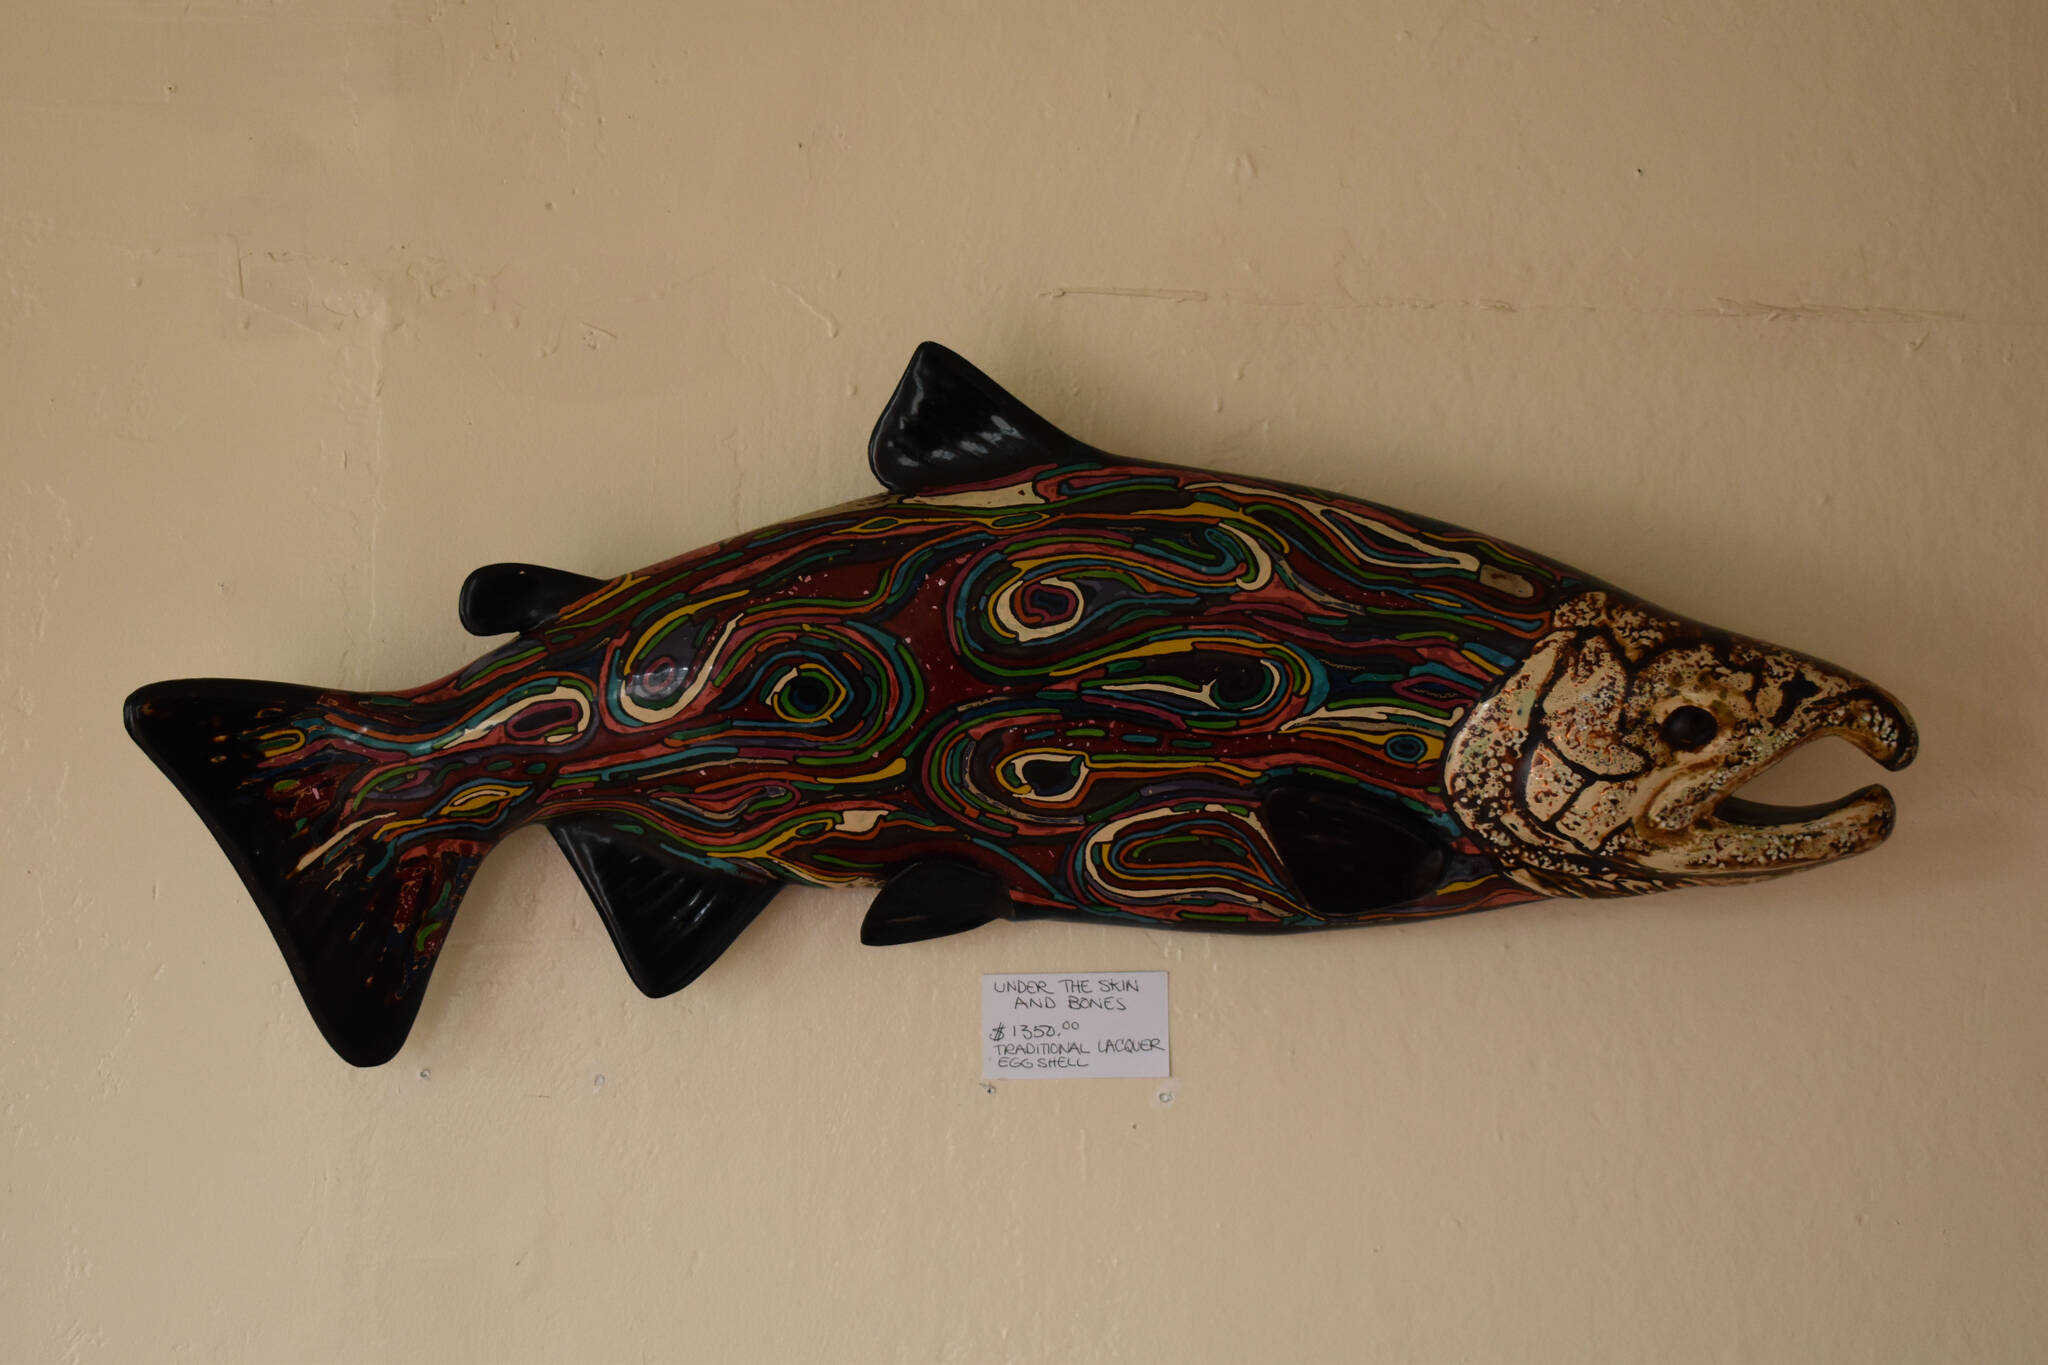 A lacquer sculpture of a salmon hangs on the walls of Kathy Matta’s gallery in Soldotna, Alaska on Wednesday, Sept. 7, 2022. (Jake Dye/Peninsula Clarion)